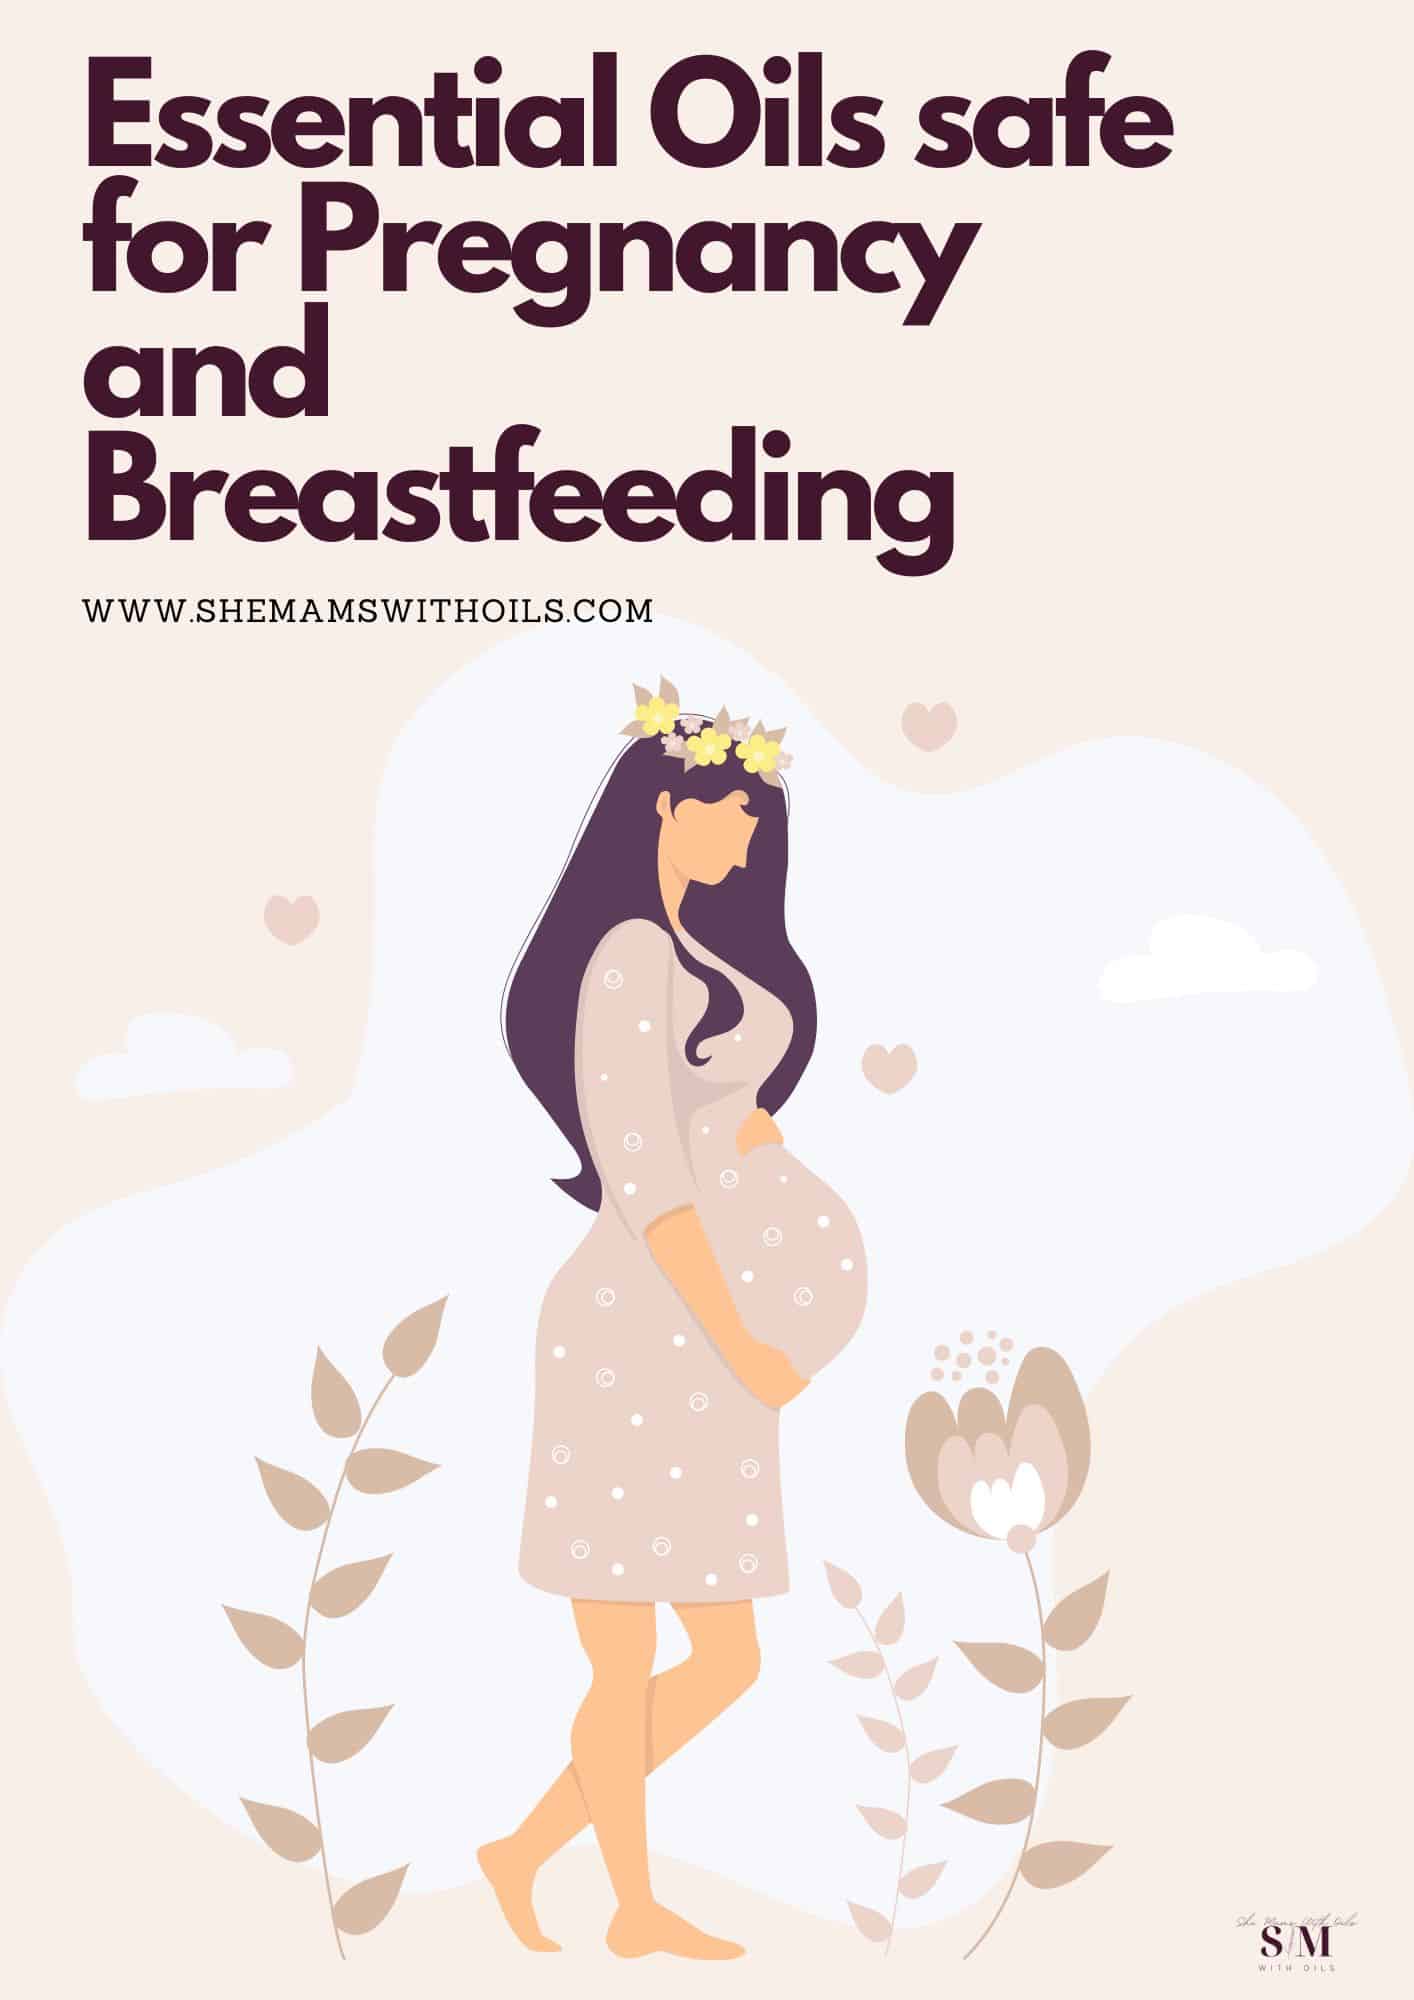 In this post I’ll show you everything you need to know about pregnancy and breastfeeding and essential oils: What oils are safe to use; What oils to avoid; How to use the oils that are safe.